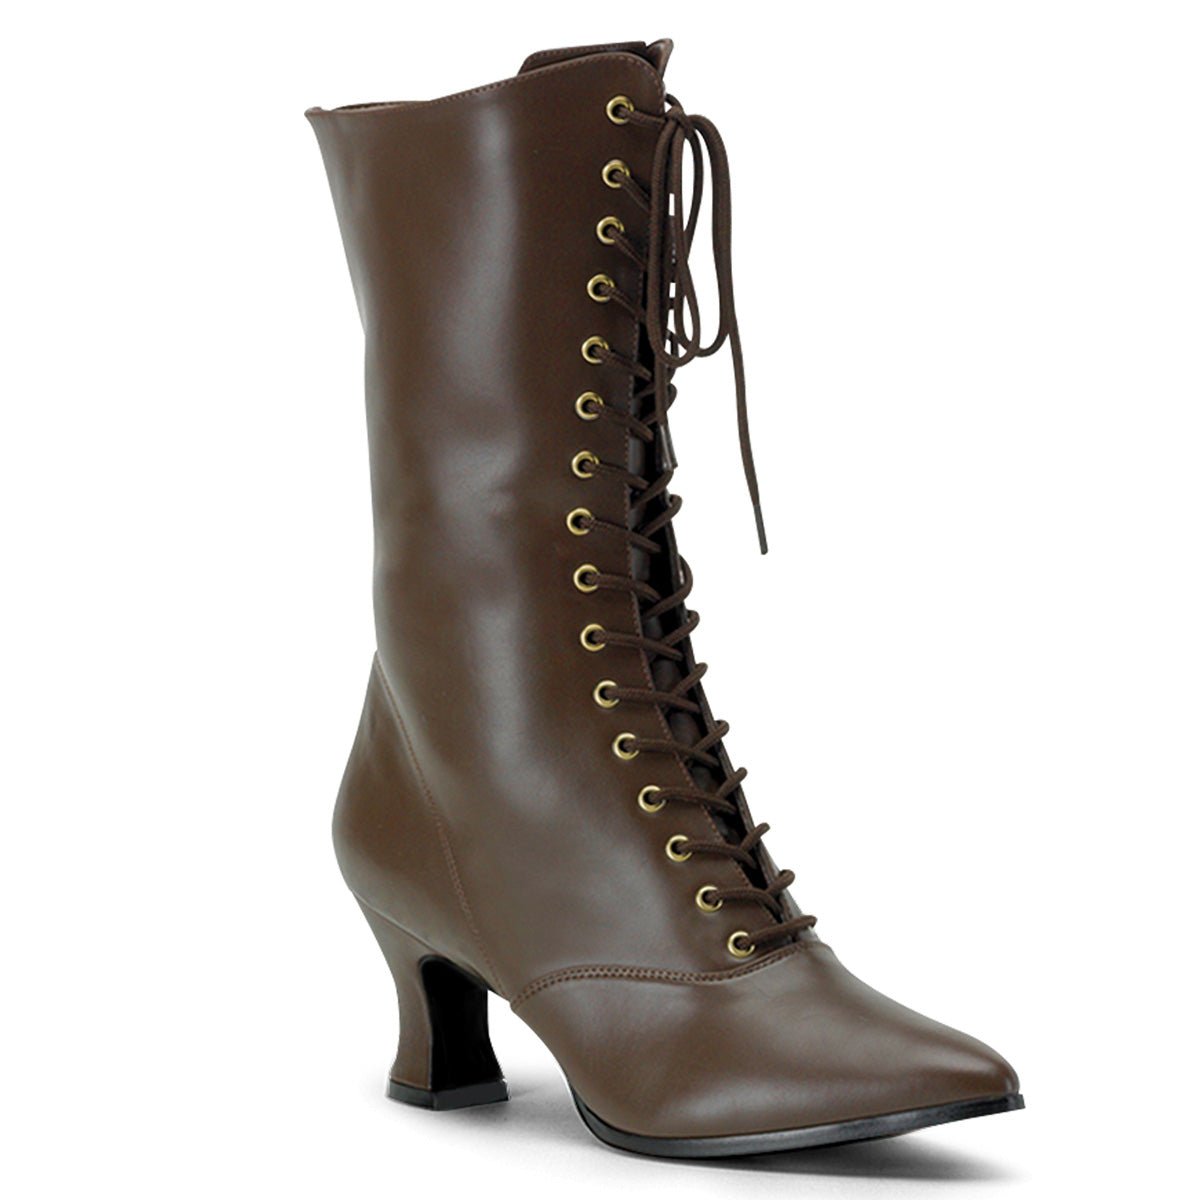 Clearance Funtasma Victorian 120 Brown Size 5UK/8USA - From Clearance Sold By Alternative Footwear